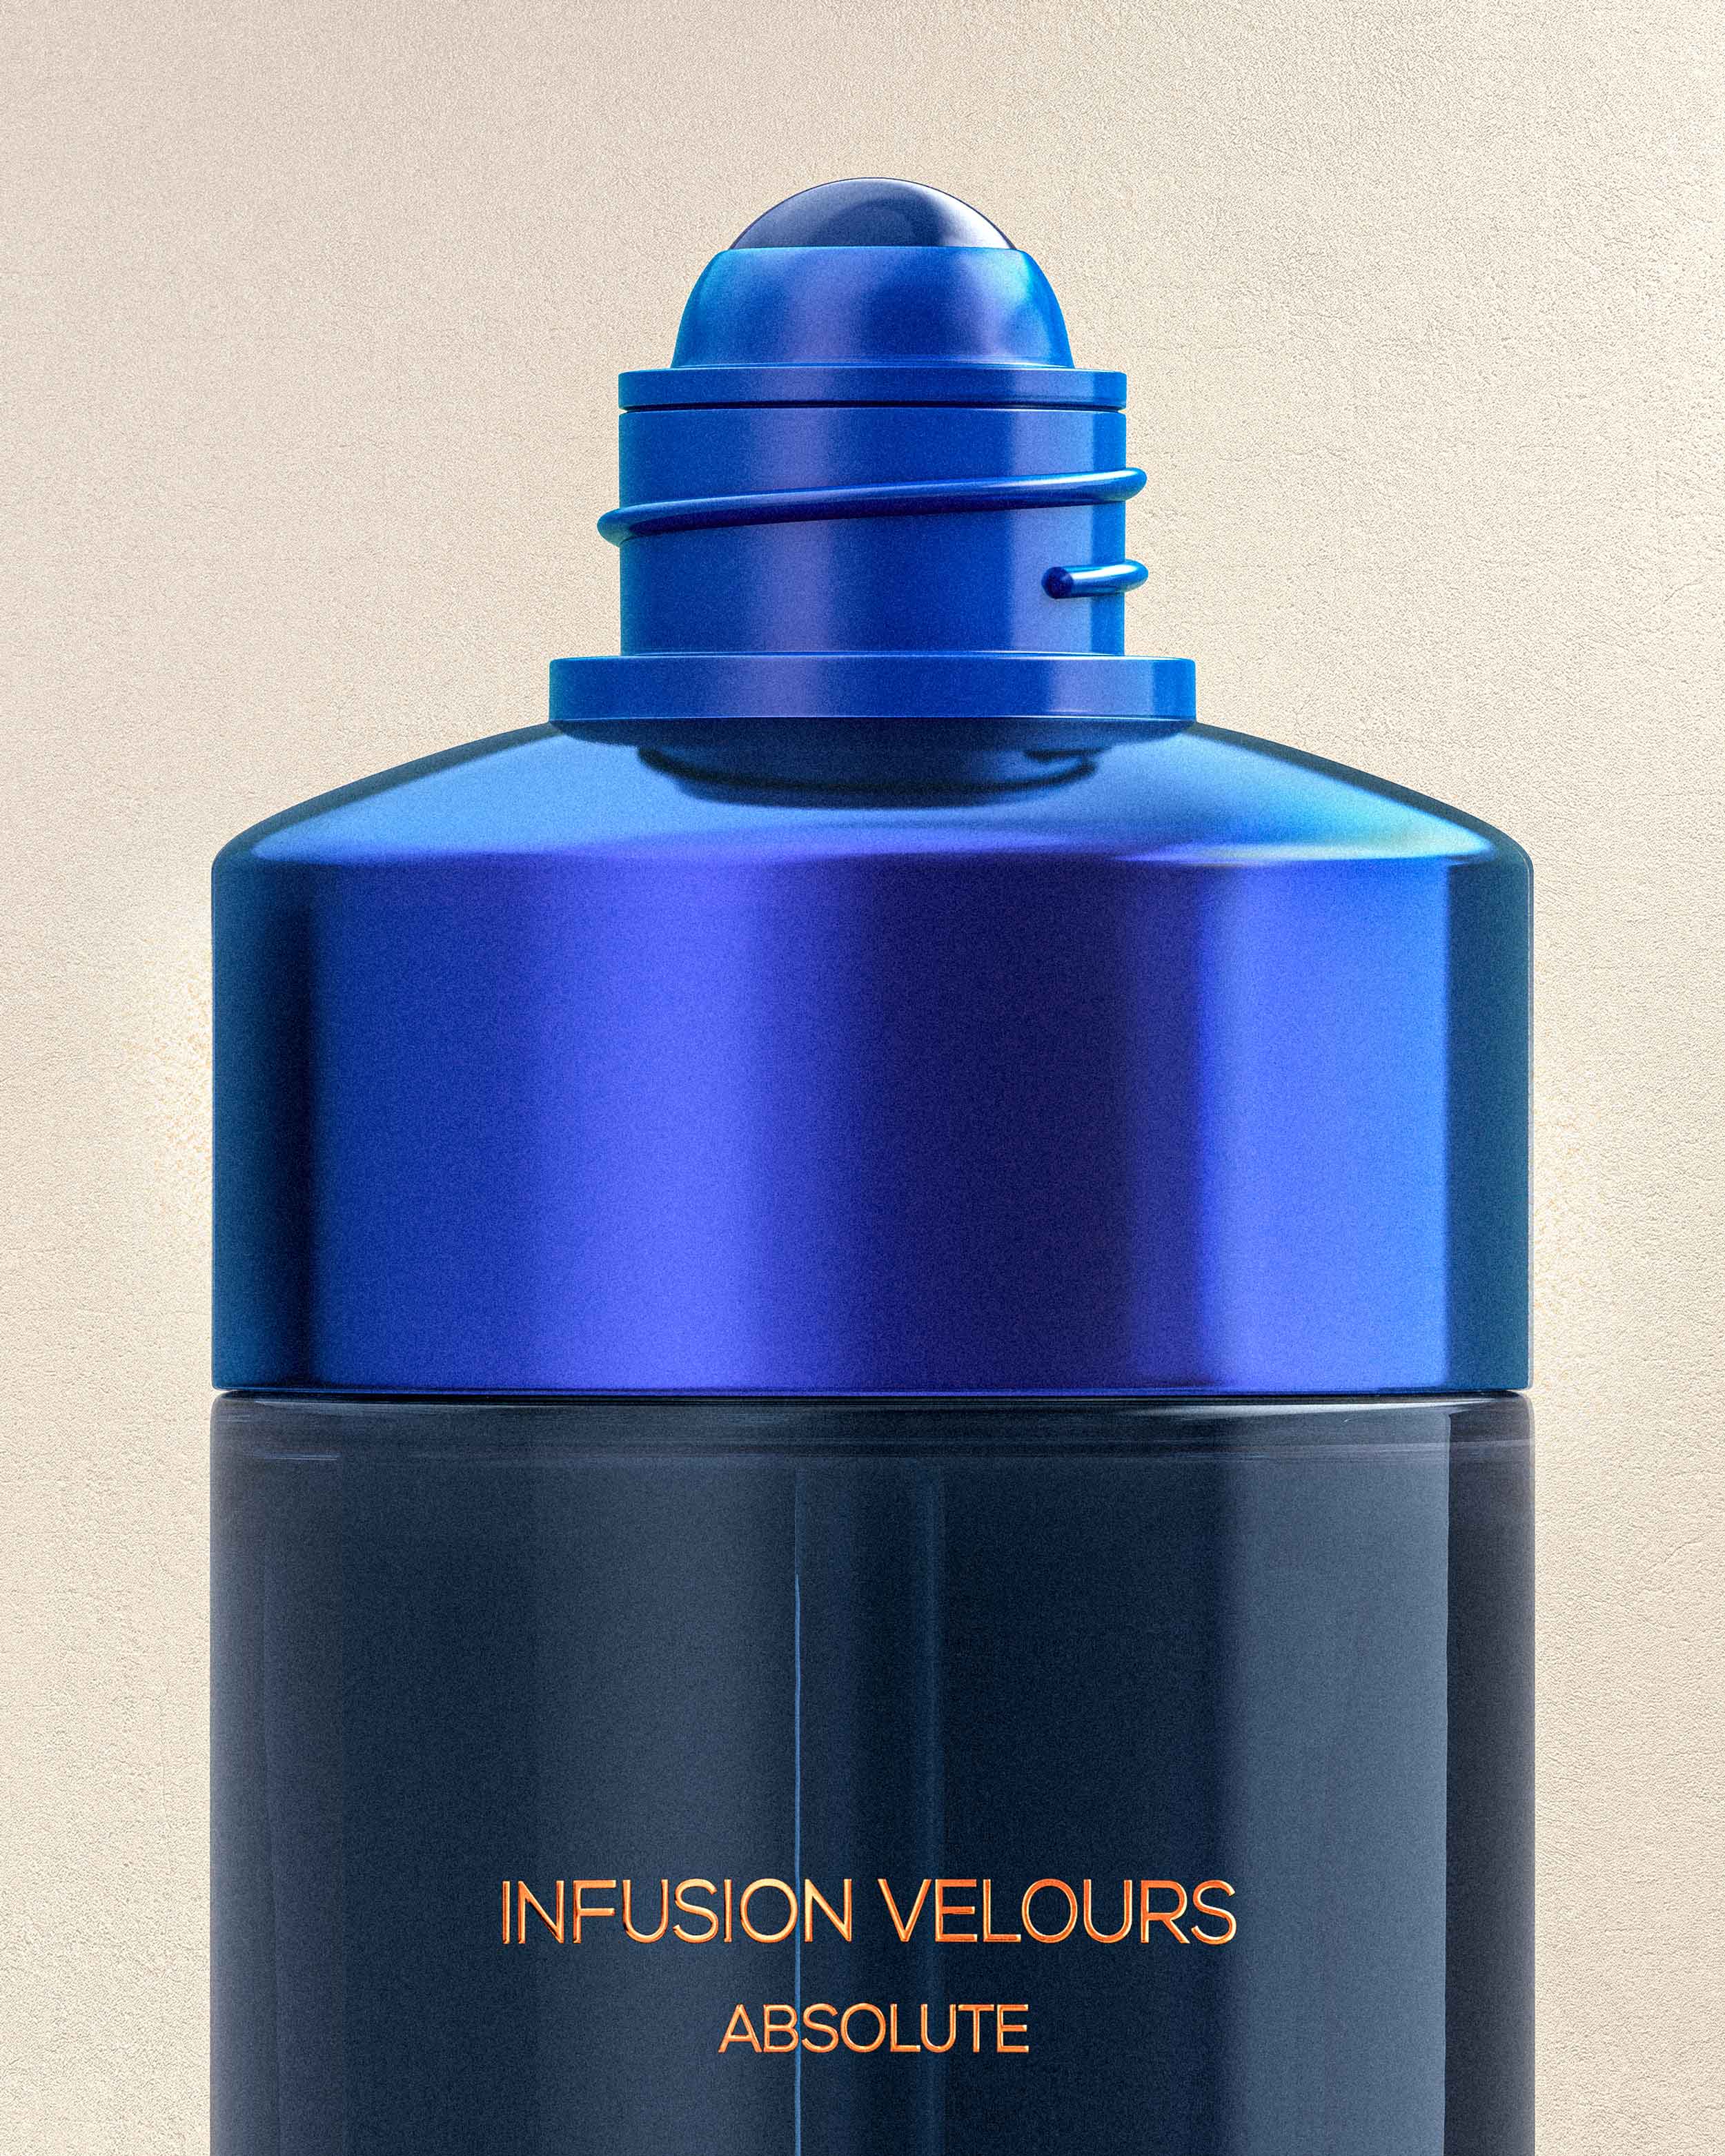 OJAR Absolute Infusion Velours Perfume Roll-on